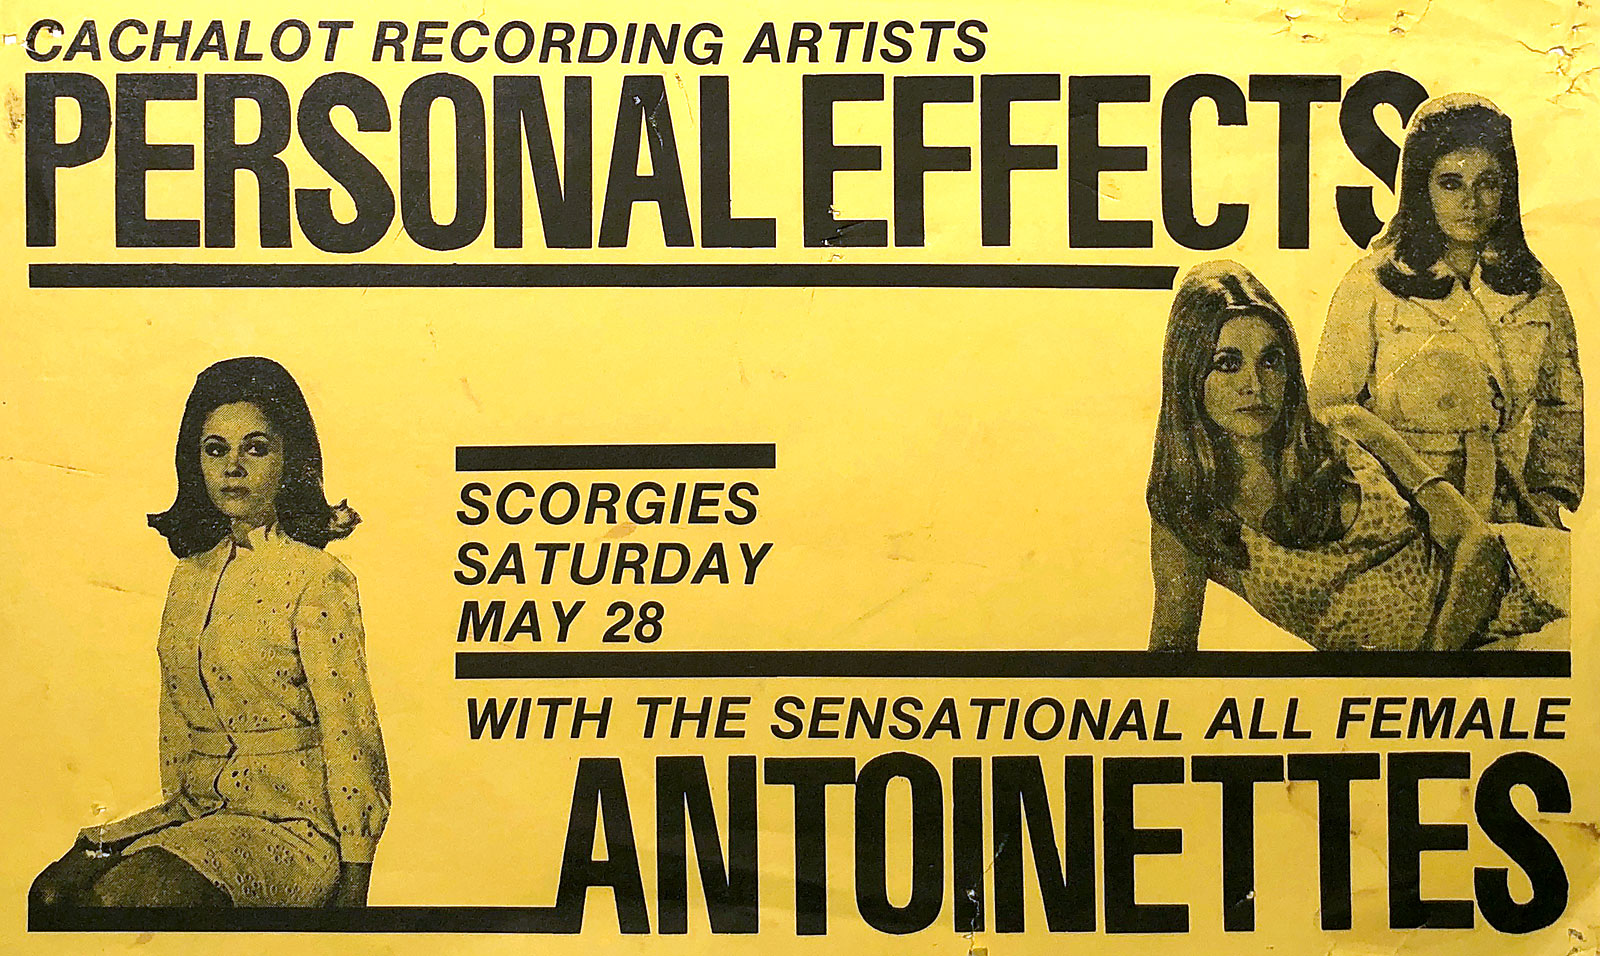 Poster for Personal Effects with the Antoinettes at Scorgie's in Rochester, New York on 05.28.1983